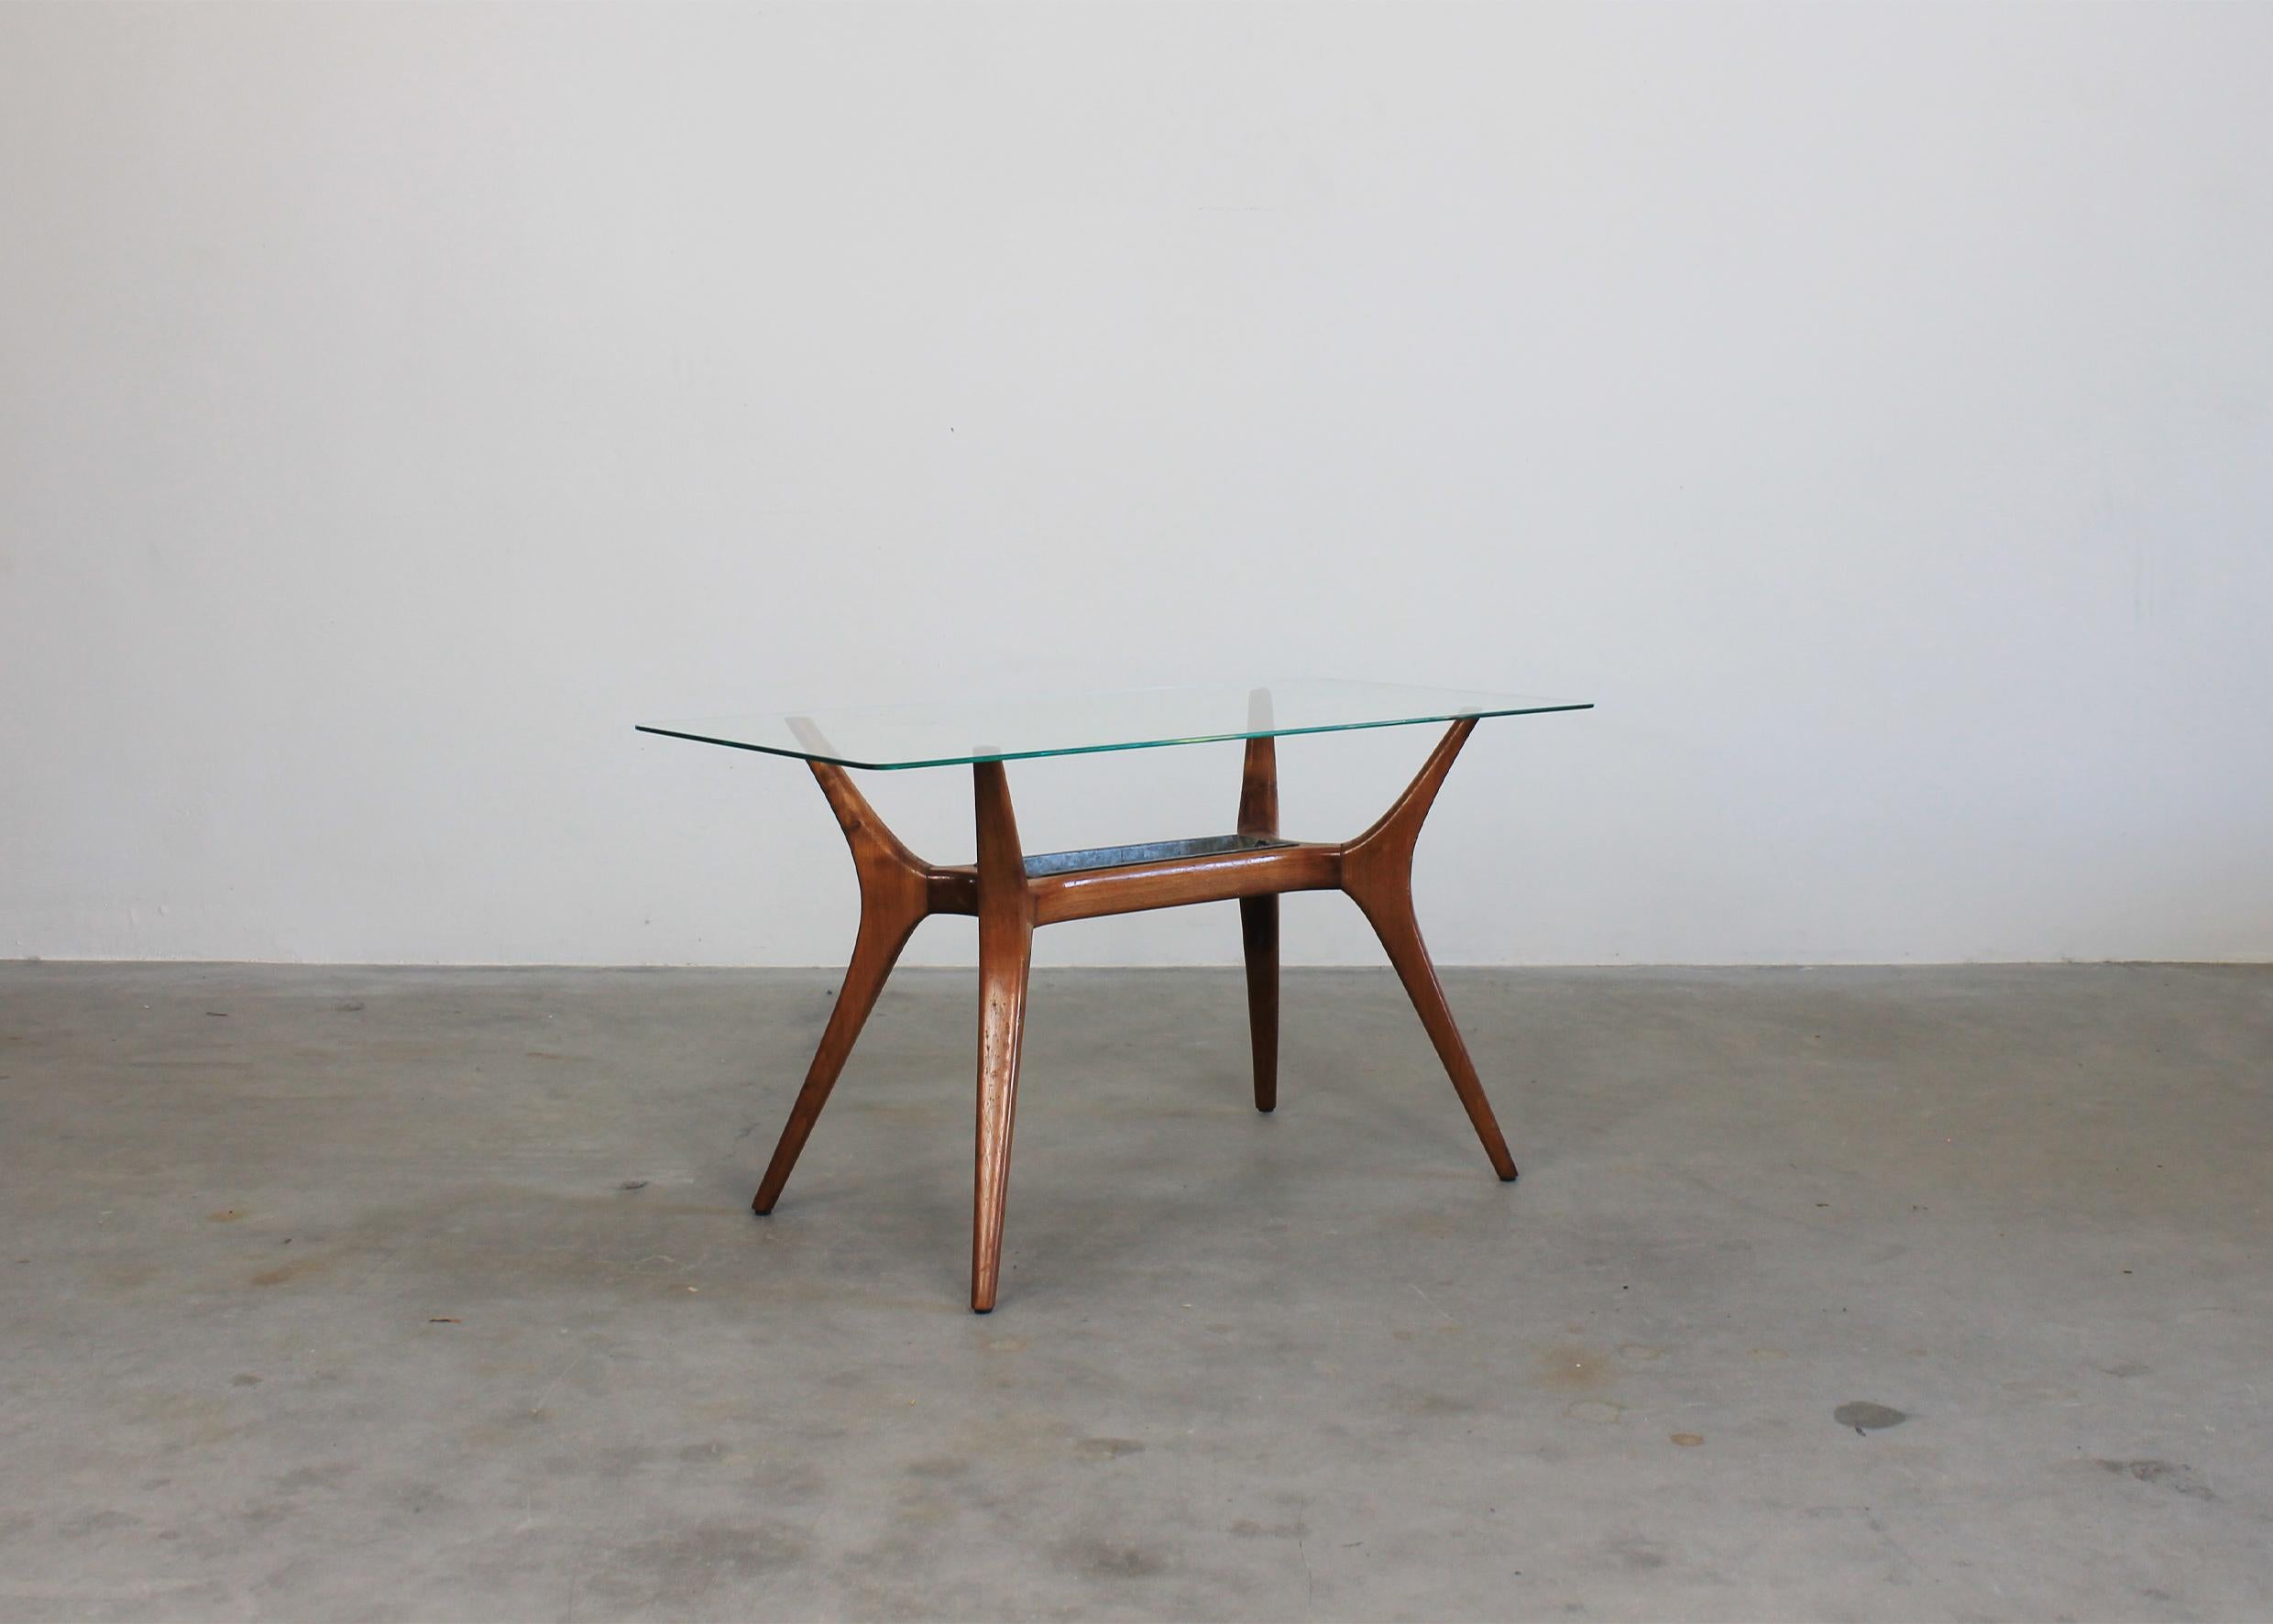 Occasional table with structure in wood with a removable center part in sheet metal and a rectangular shaped table top, designe by Gio Ponti and produced by Figli di Amedeo Cassina in the 1950s.

Gio Ponti was an icon of the modernist movement: the